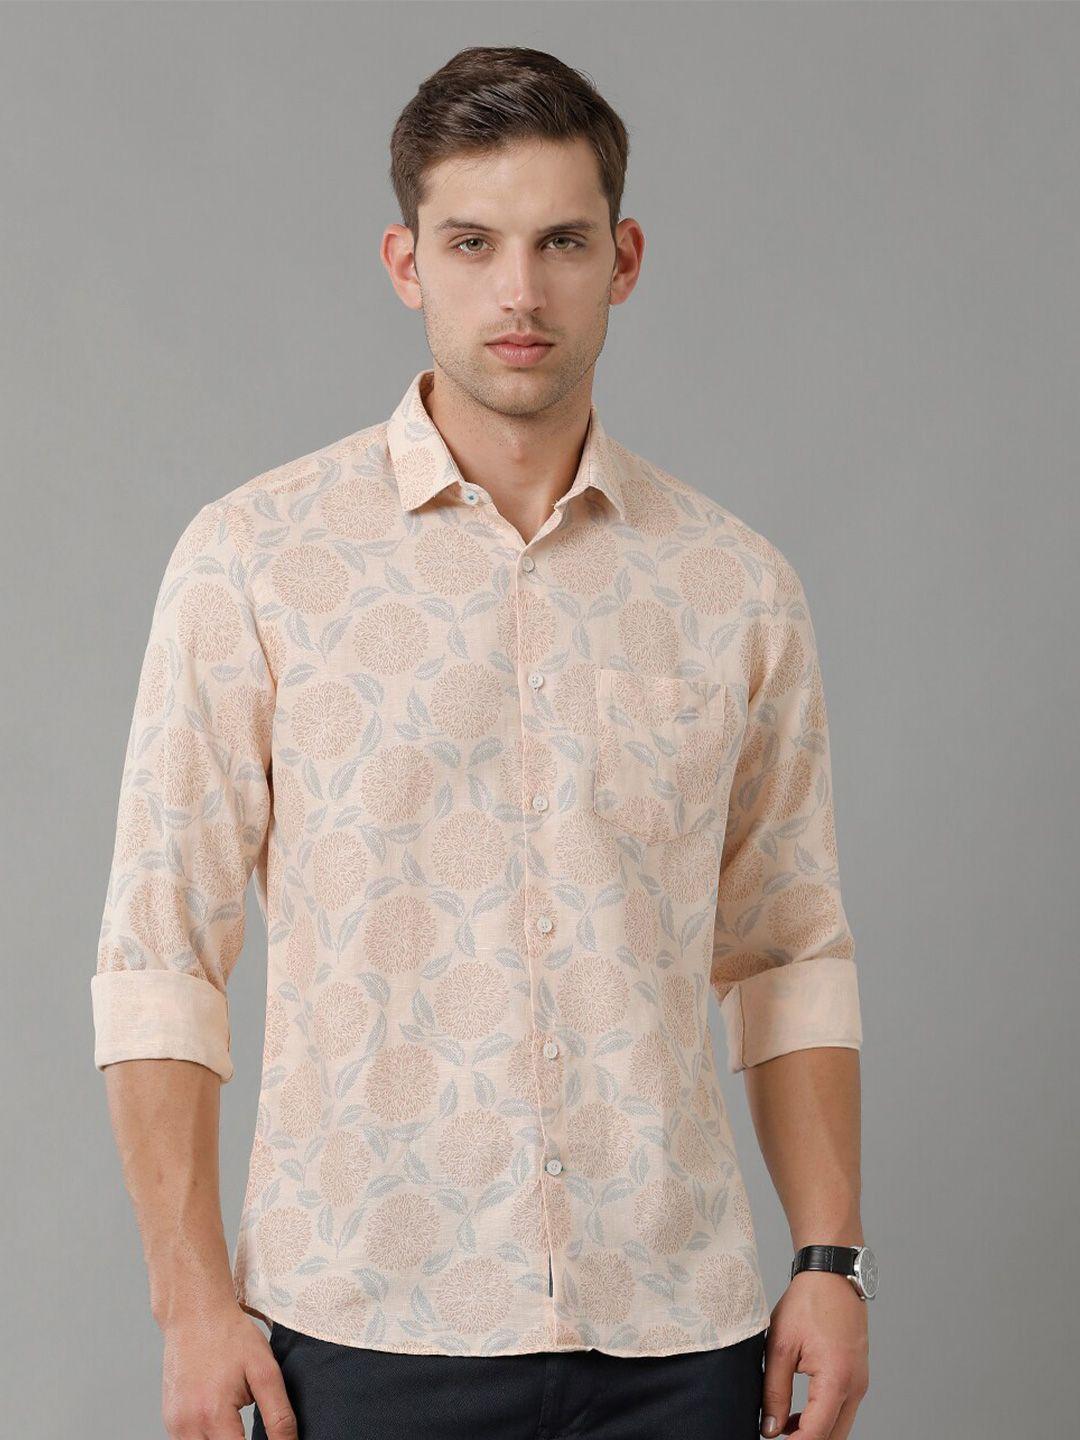 linen club contemporary floral printed pure linen casual shirt